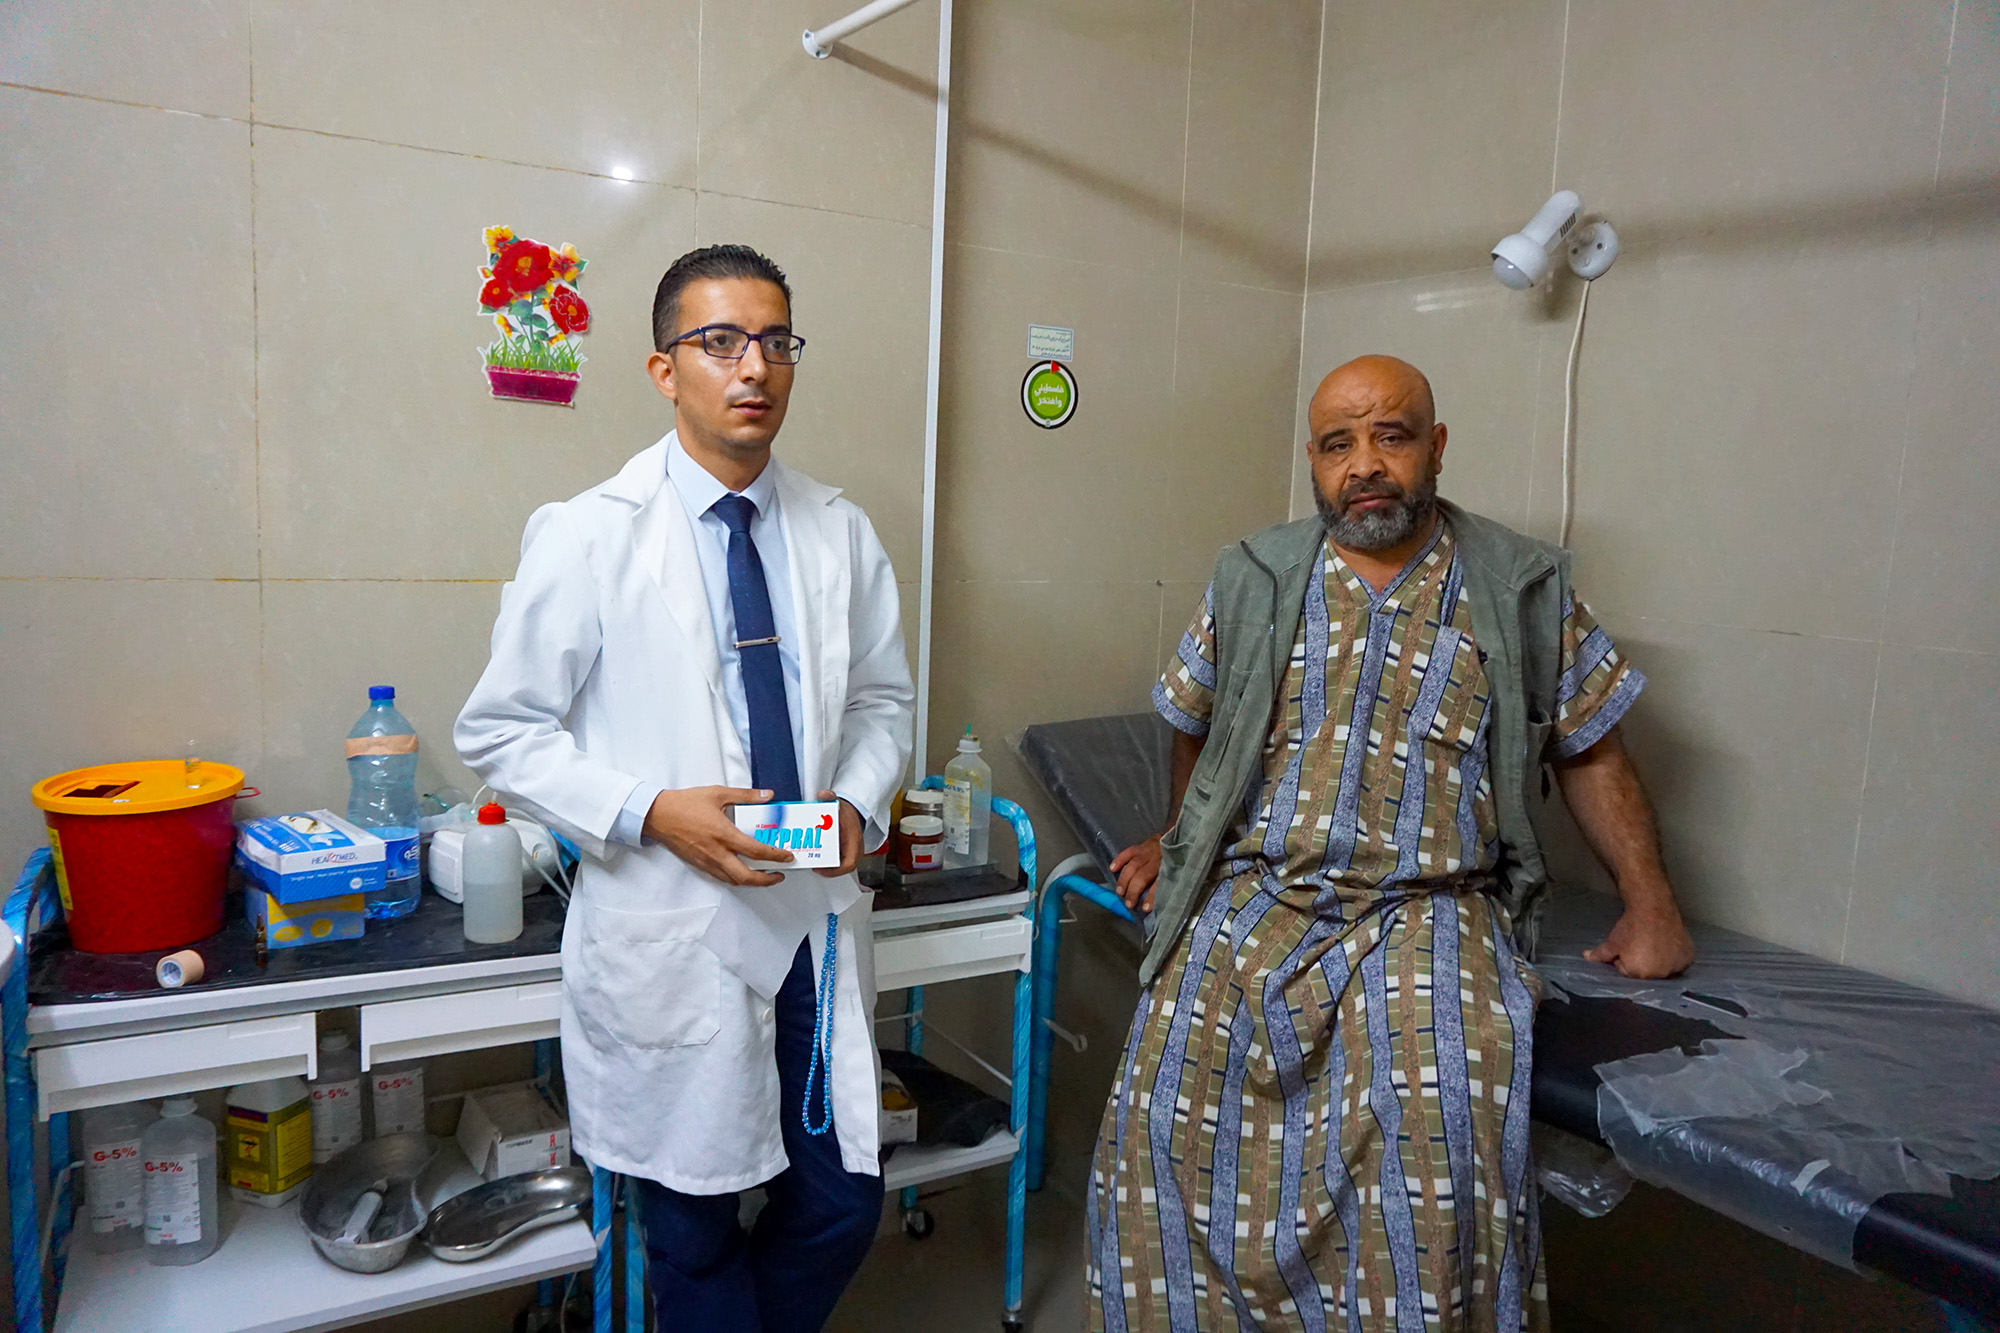 Raed is prescribed omeprazole which is used to treat painful stomach ulcers. Anera delivered the medicine to the Yazour Health Clinic in the Balata Palestinian refugee camp.